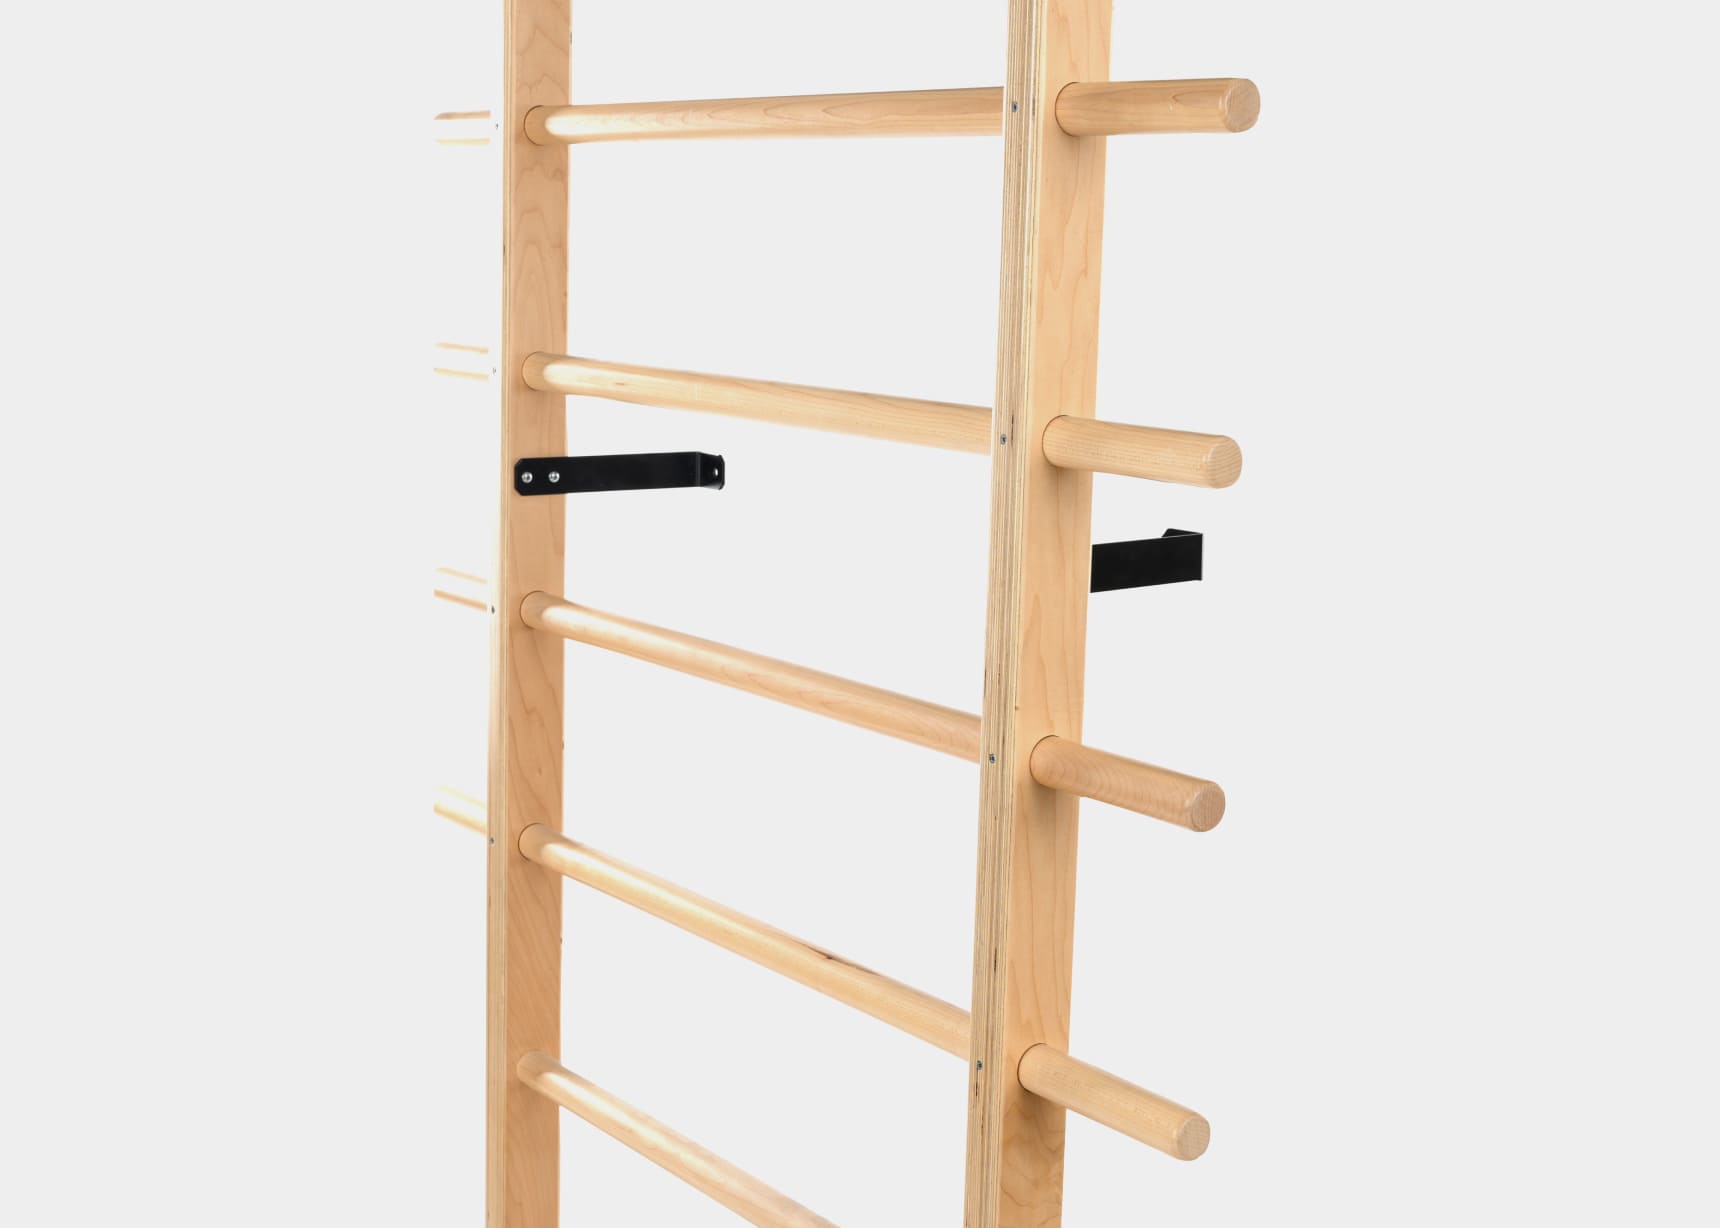 CoreAlign with Freestanding Ladder-Cunruope™